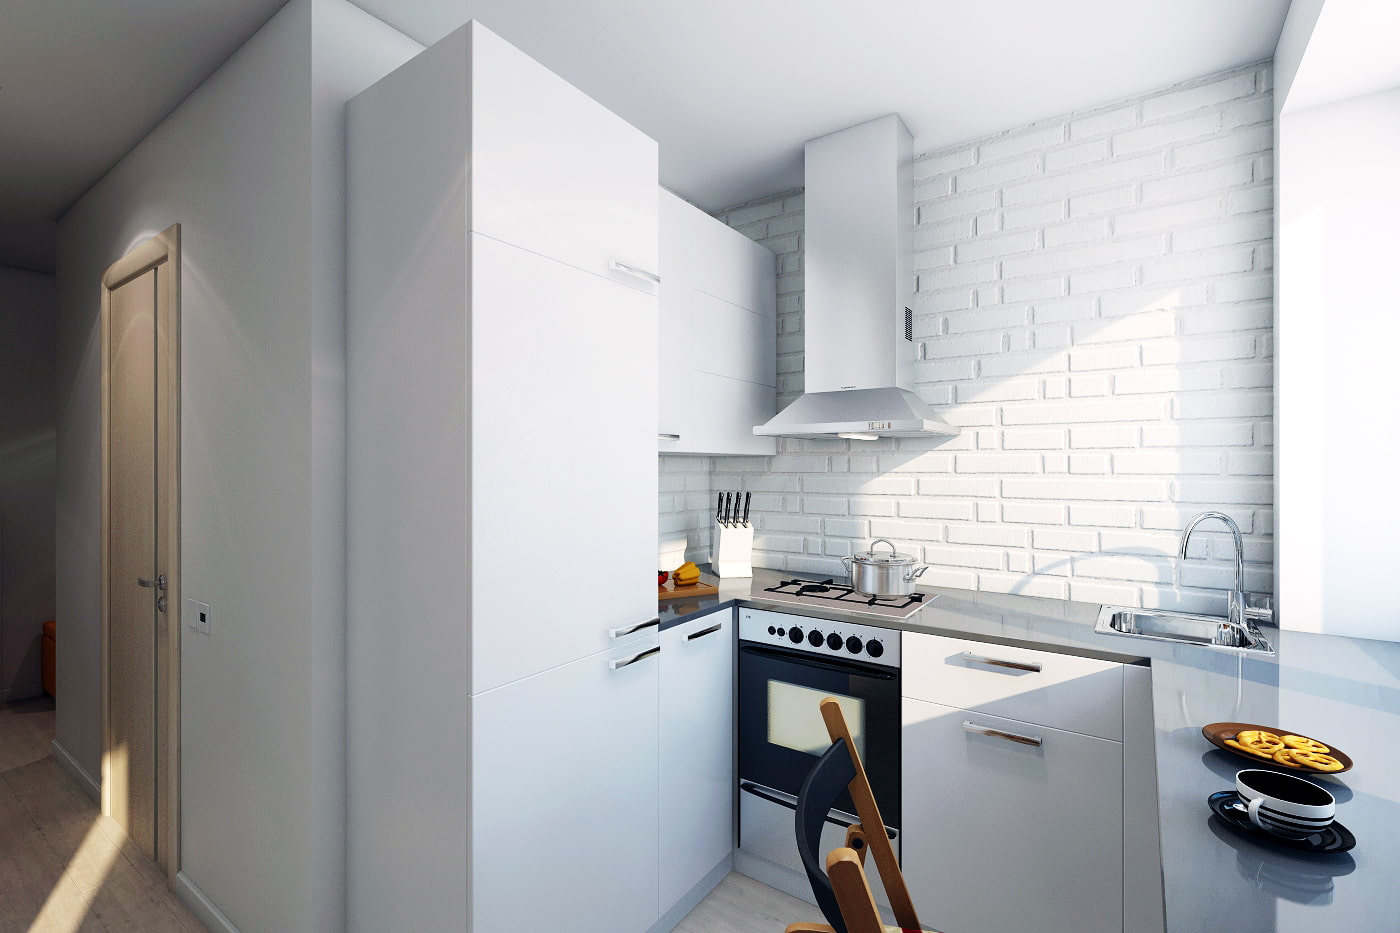 Small kitchen with a white brick wall